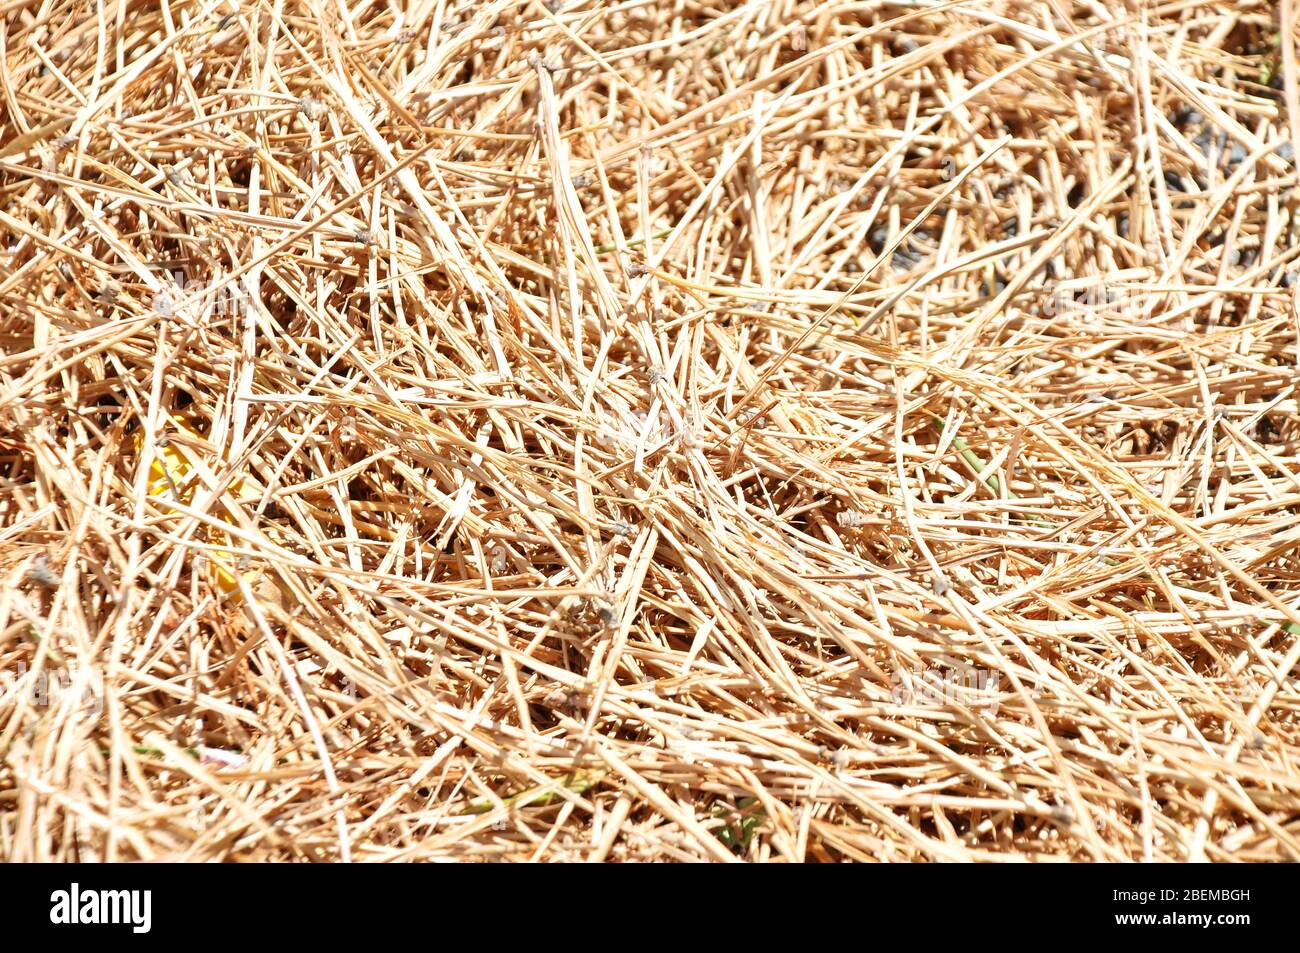 stalks and pieces of dried wild grass or straw Stock Photo